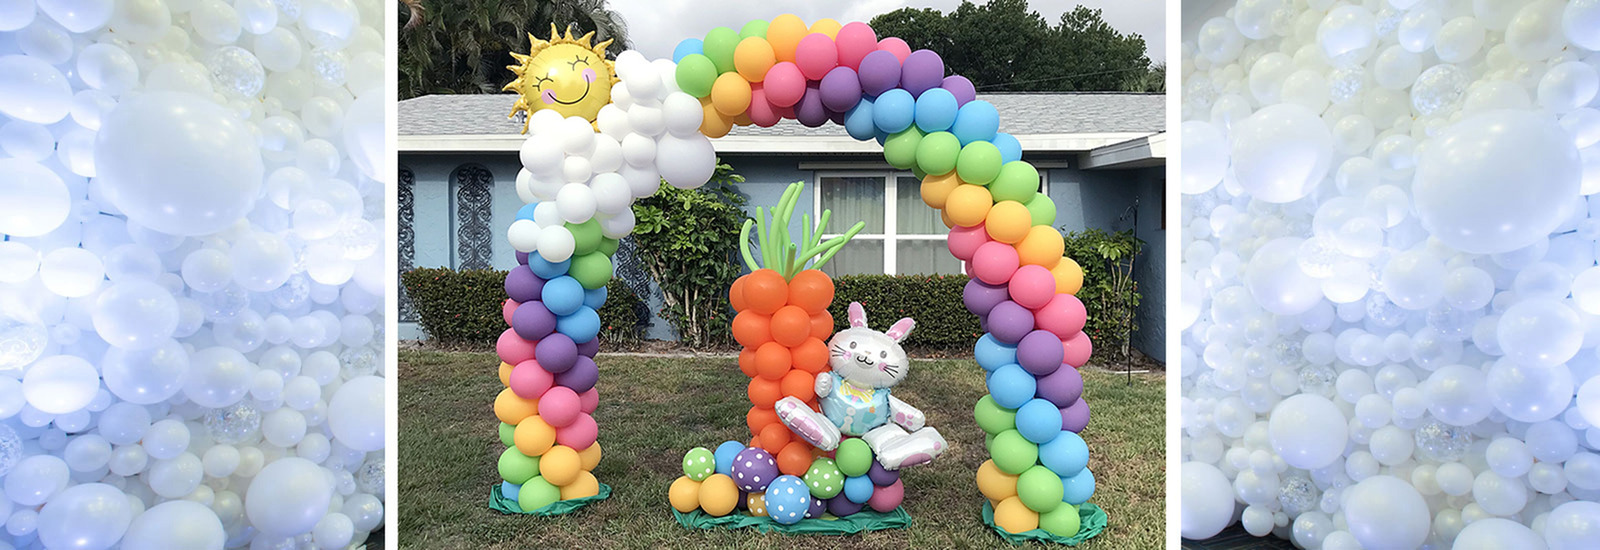 Easter Rainbow Balloon Arch with clouds and sun and The Easter Bunny under the rainbow with a large carrot. Balloons Melbourne FL